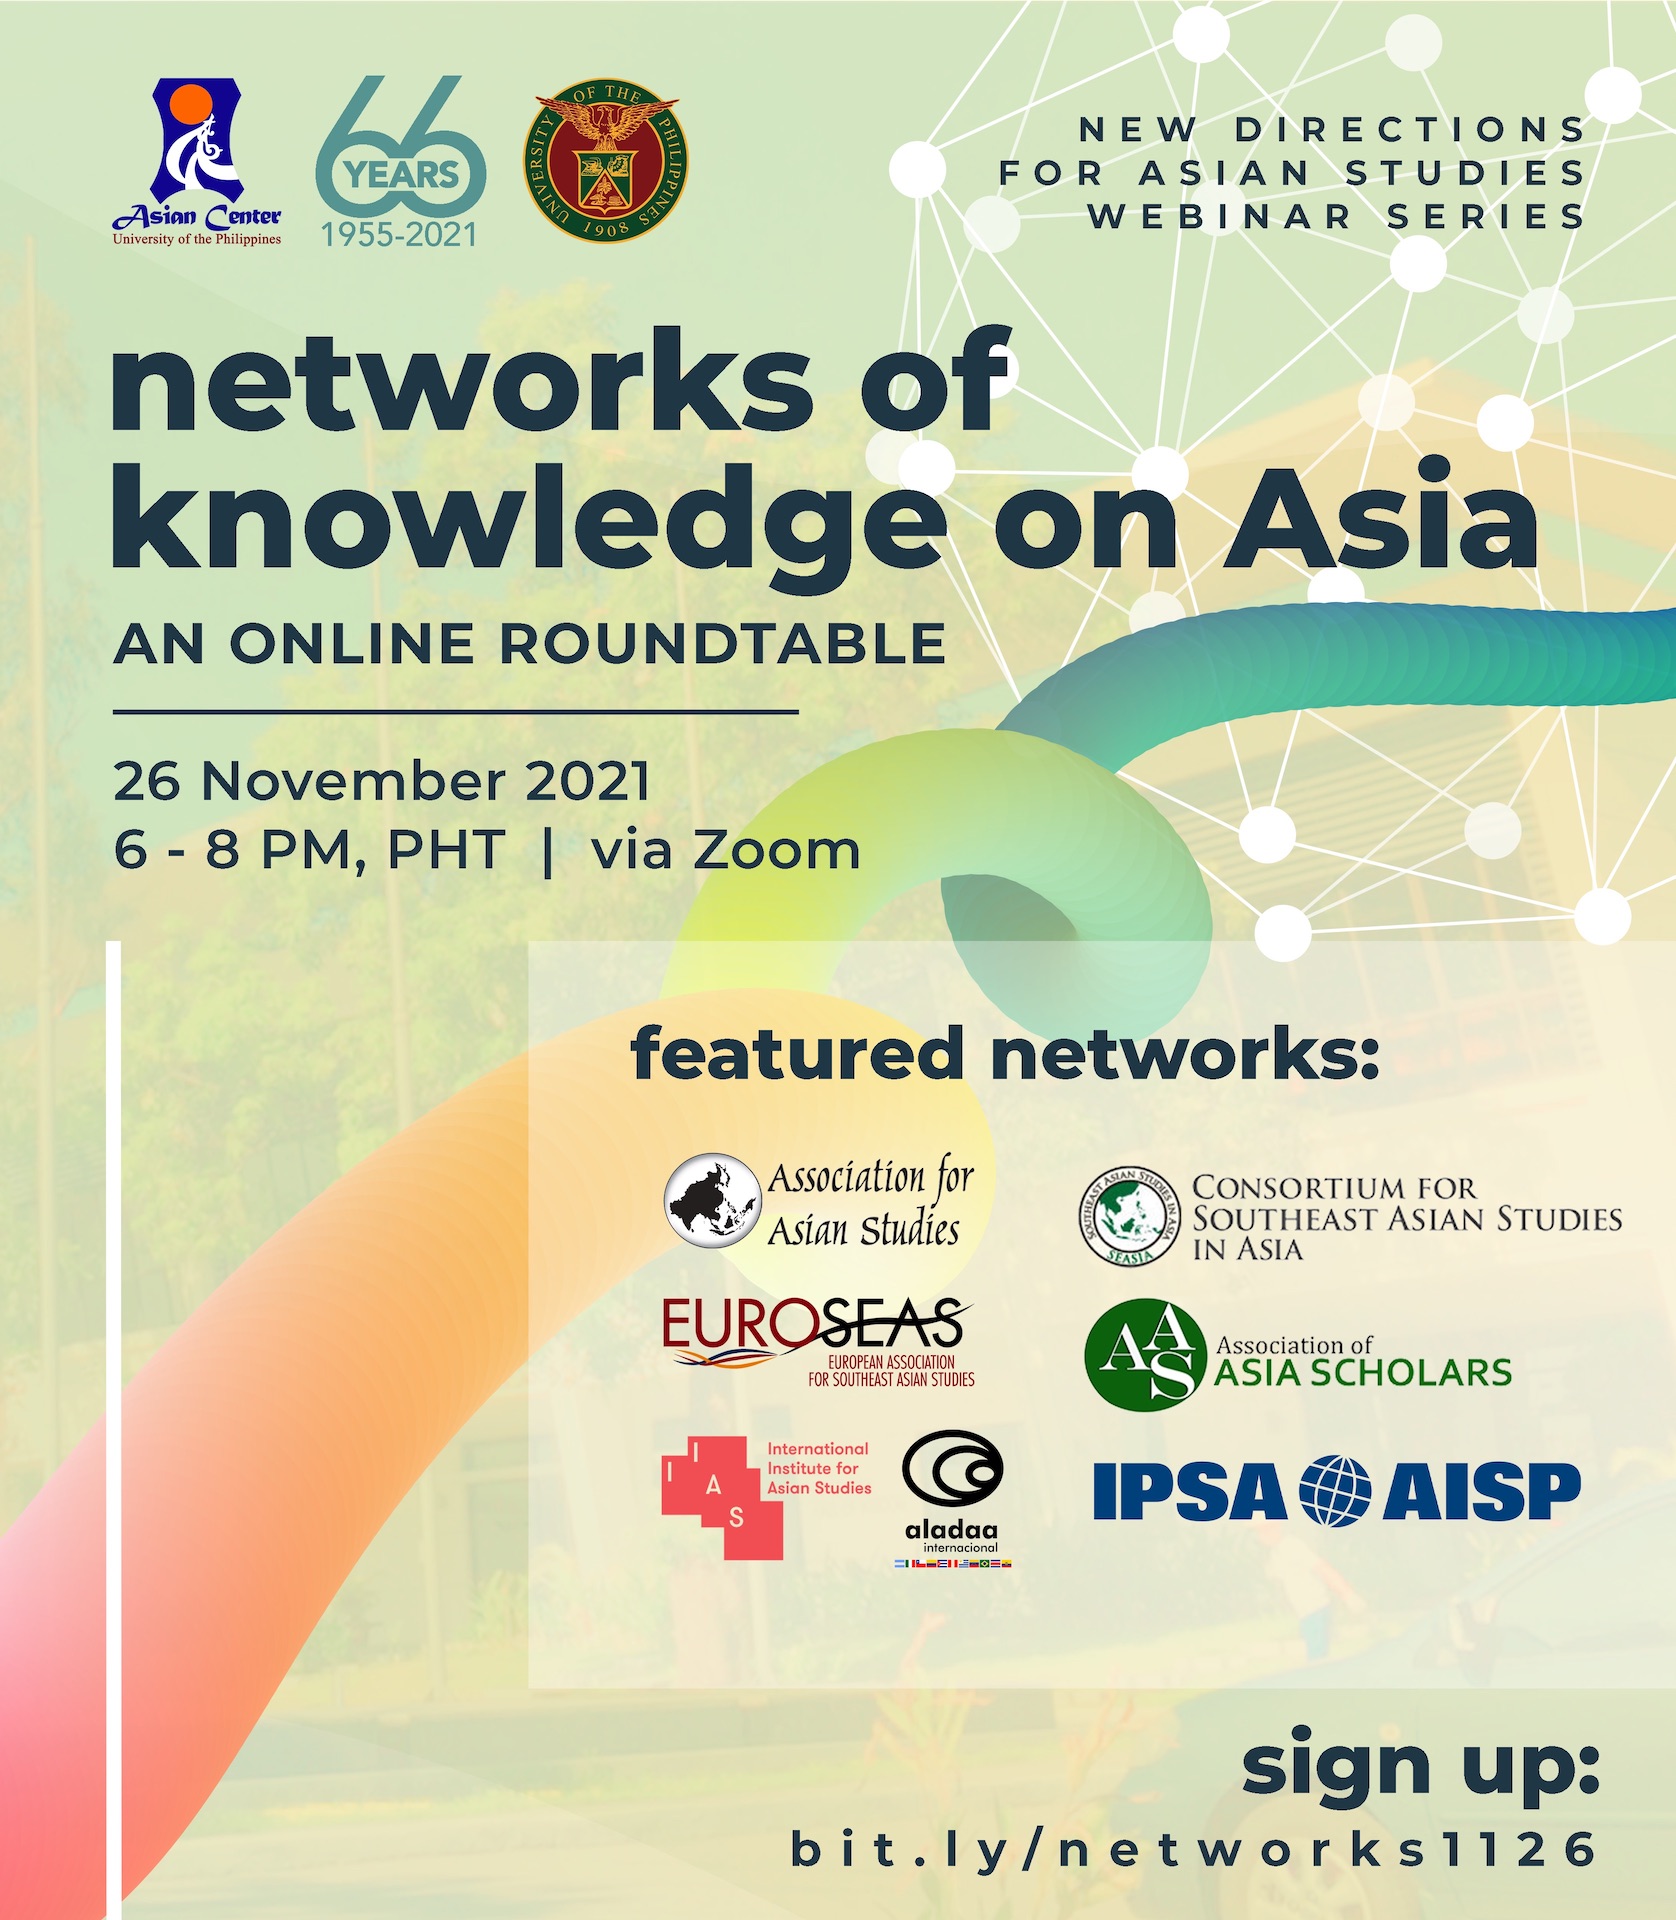 26 Nov 2021: New Directions for Asian Studies Webinar Series: Networks of Knowledge in Asia | Online Roundtable